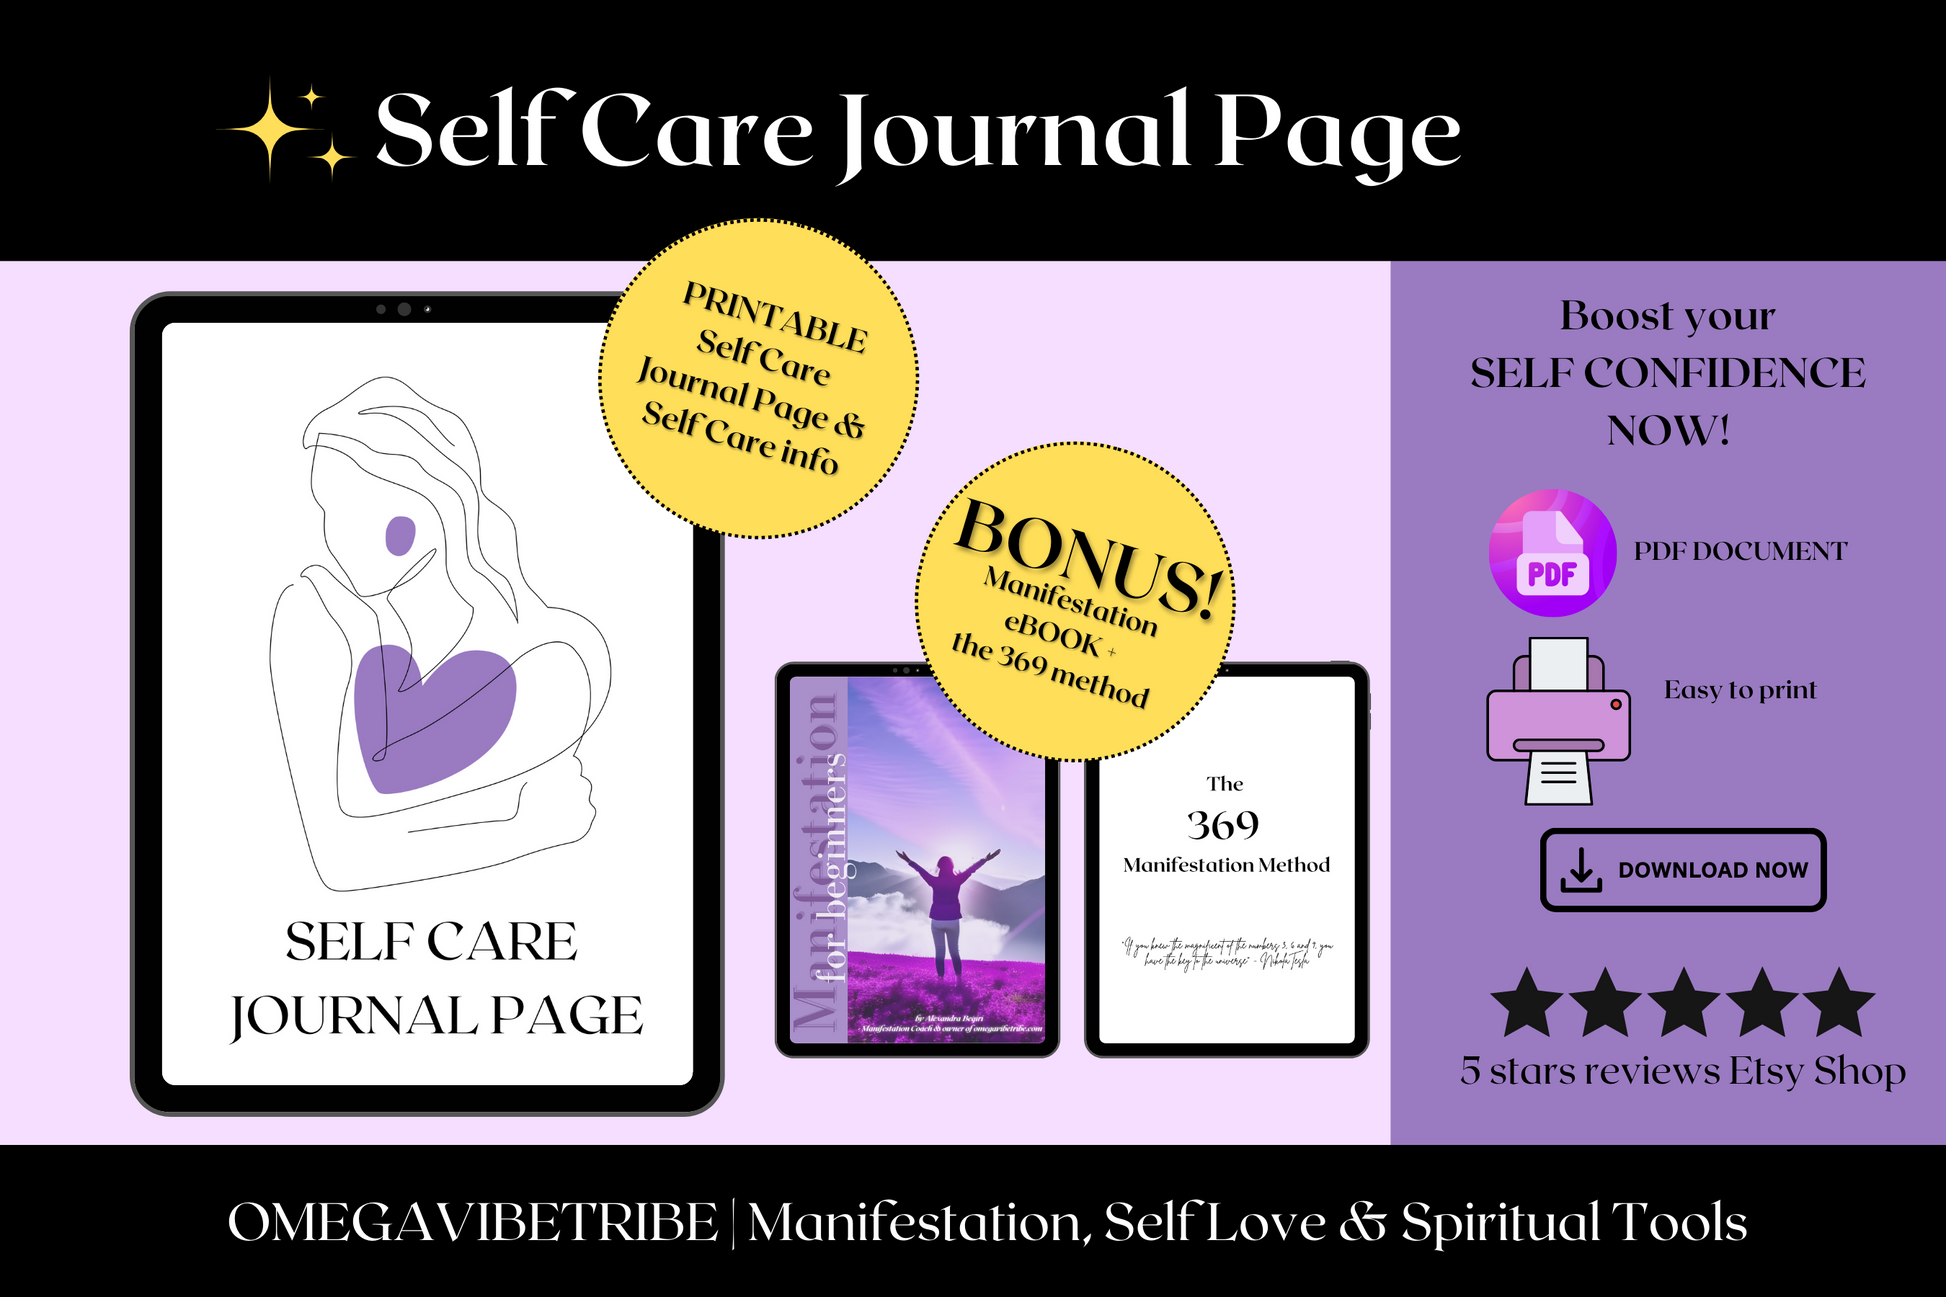 Writual Planner  Tarot Journals for Self-Care and Self-Discovery